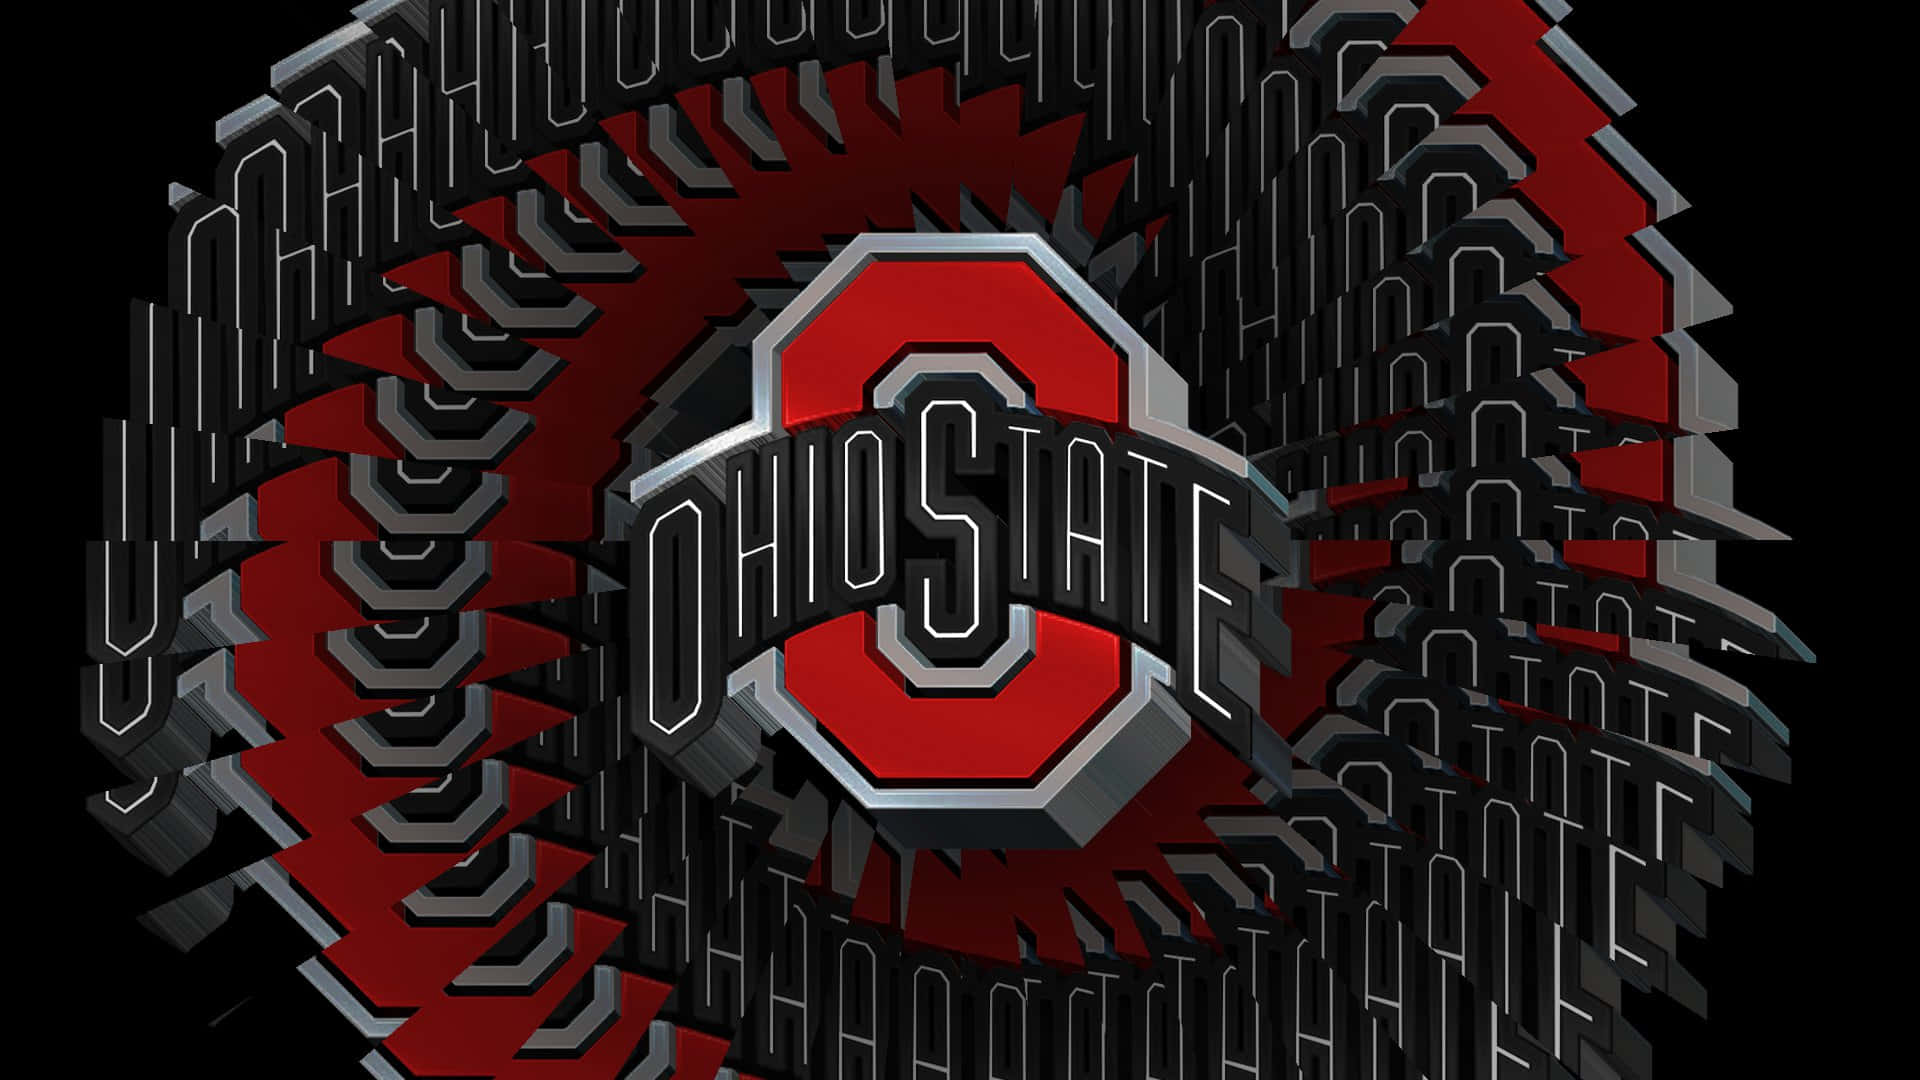 Show off your Ohio State Buckeye pride with this cool image! Wallpaper